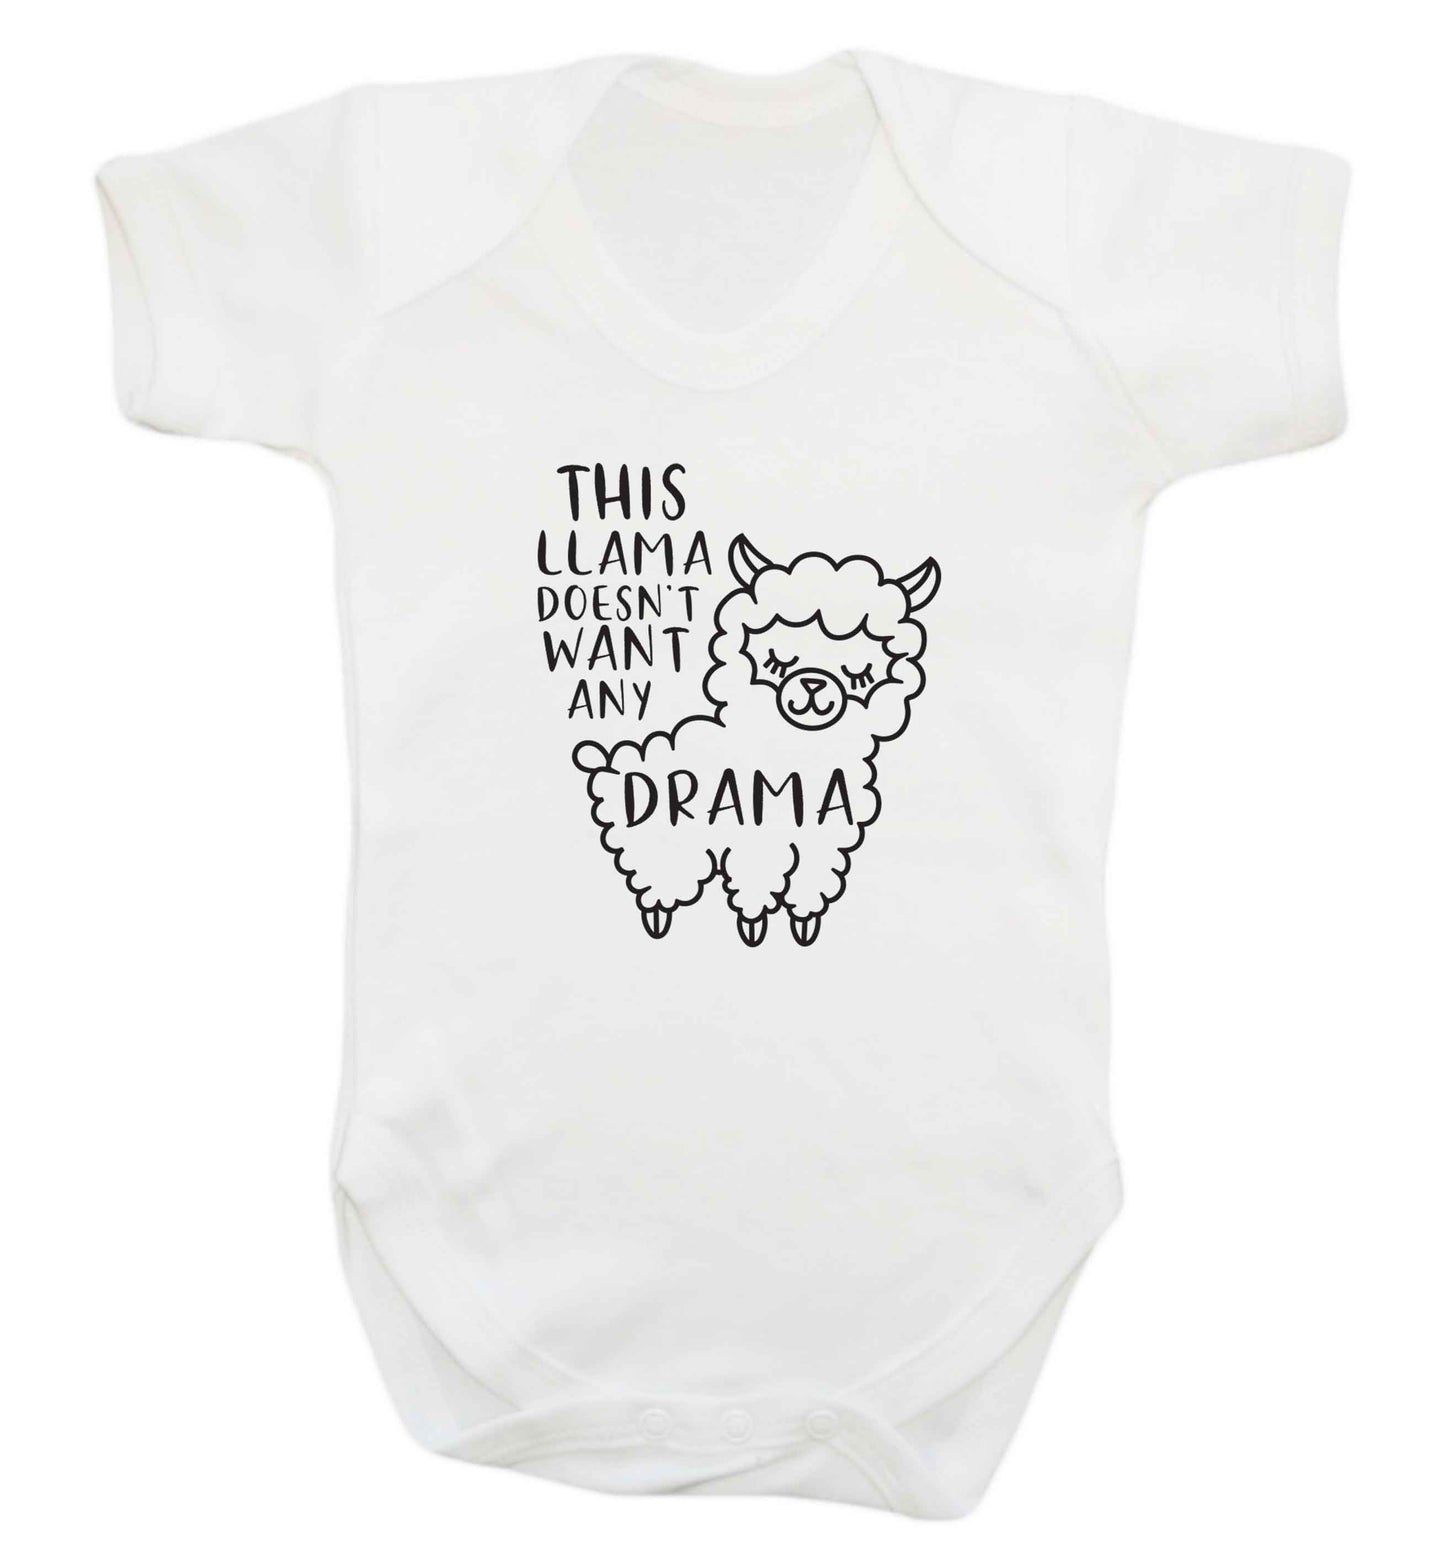 This Llama doesn't want any drama baby vest white 18-24 months